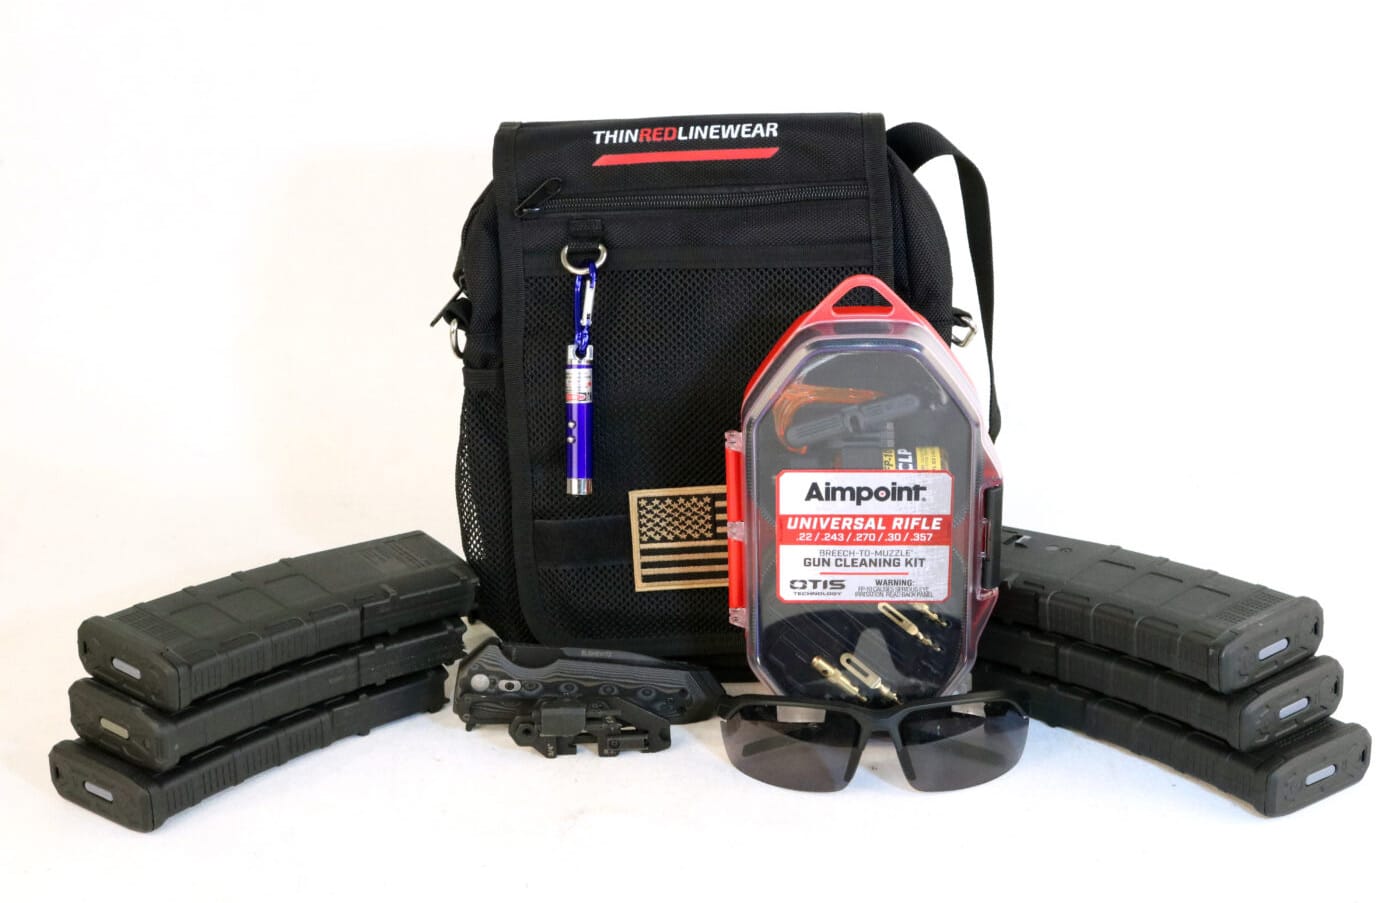 Thin Red Line Wear Operator Bag with ammo, magazines, knife, glasses, and rifle cleaning kit next to it